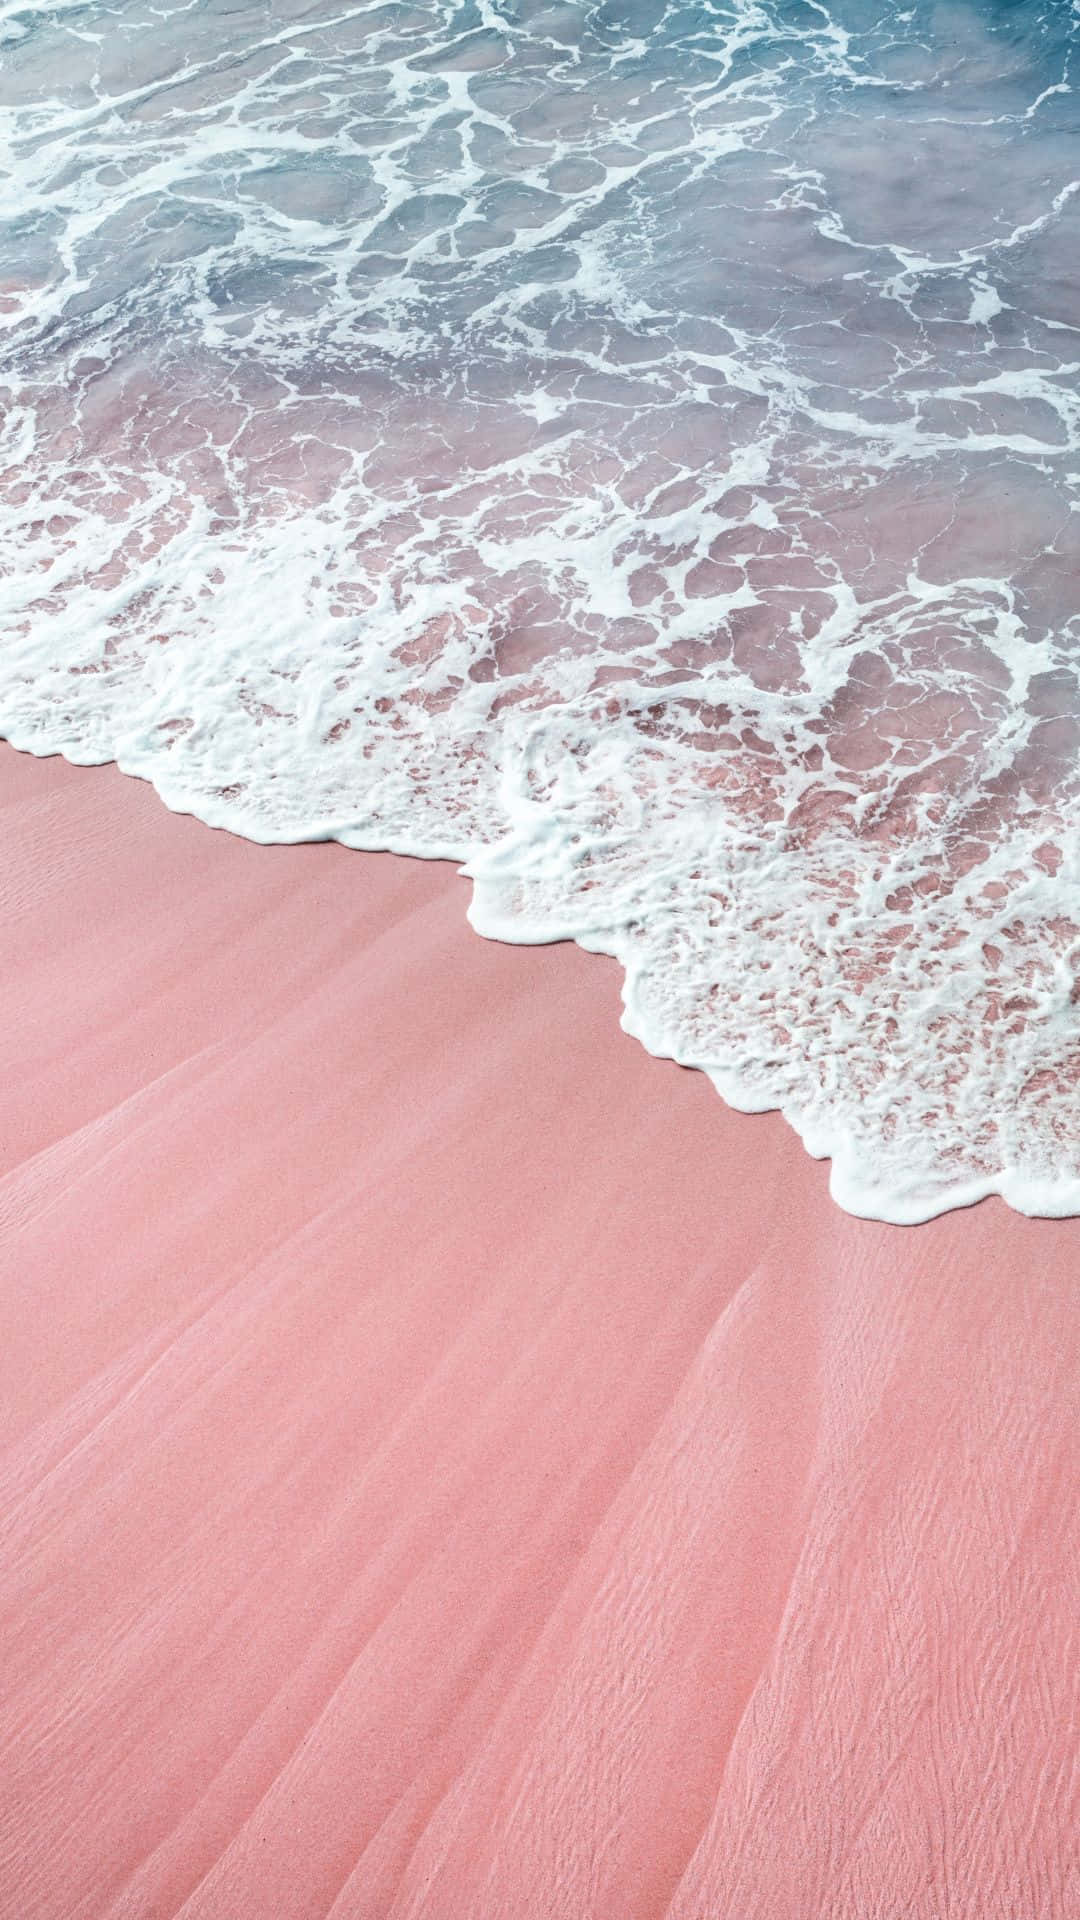 Catch the beauty of the endless ocean. Wallpaper